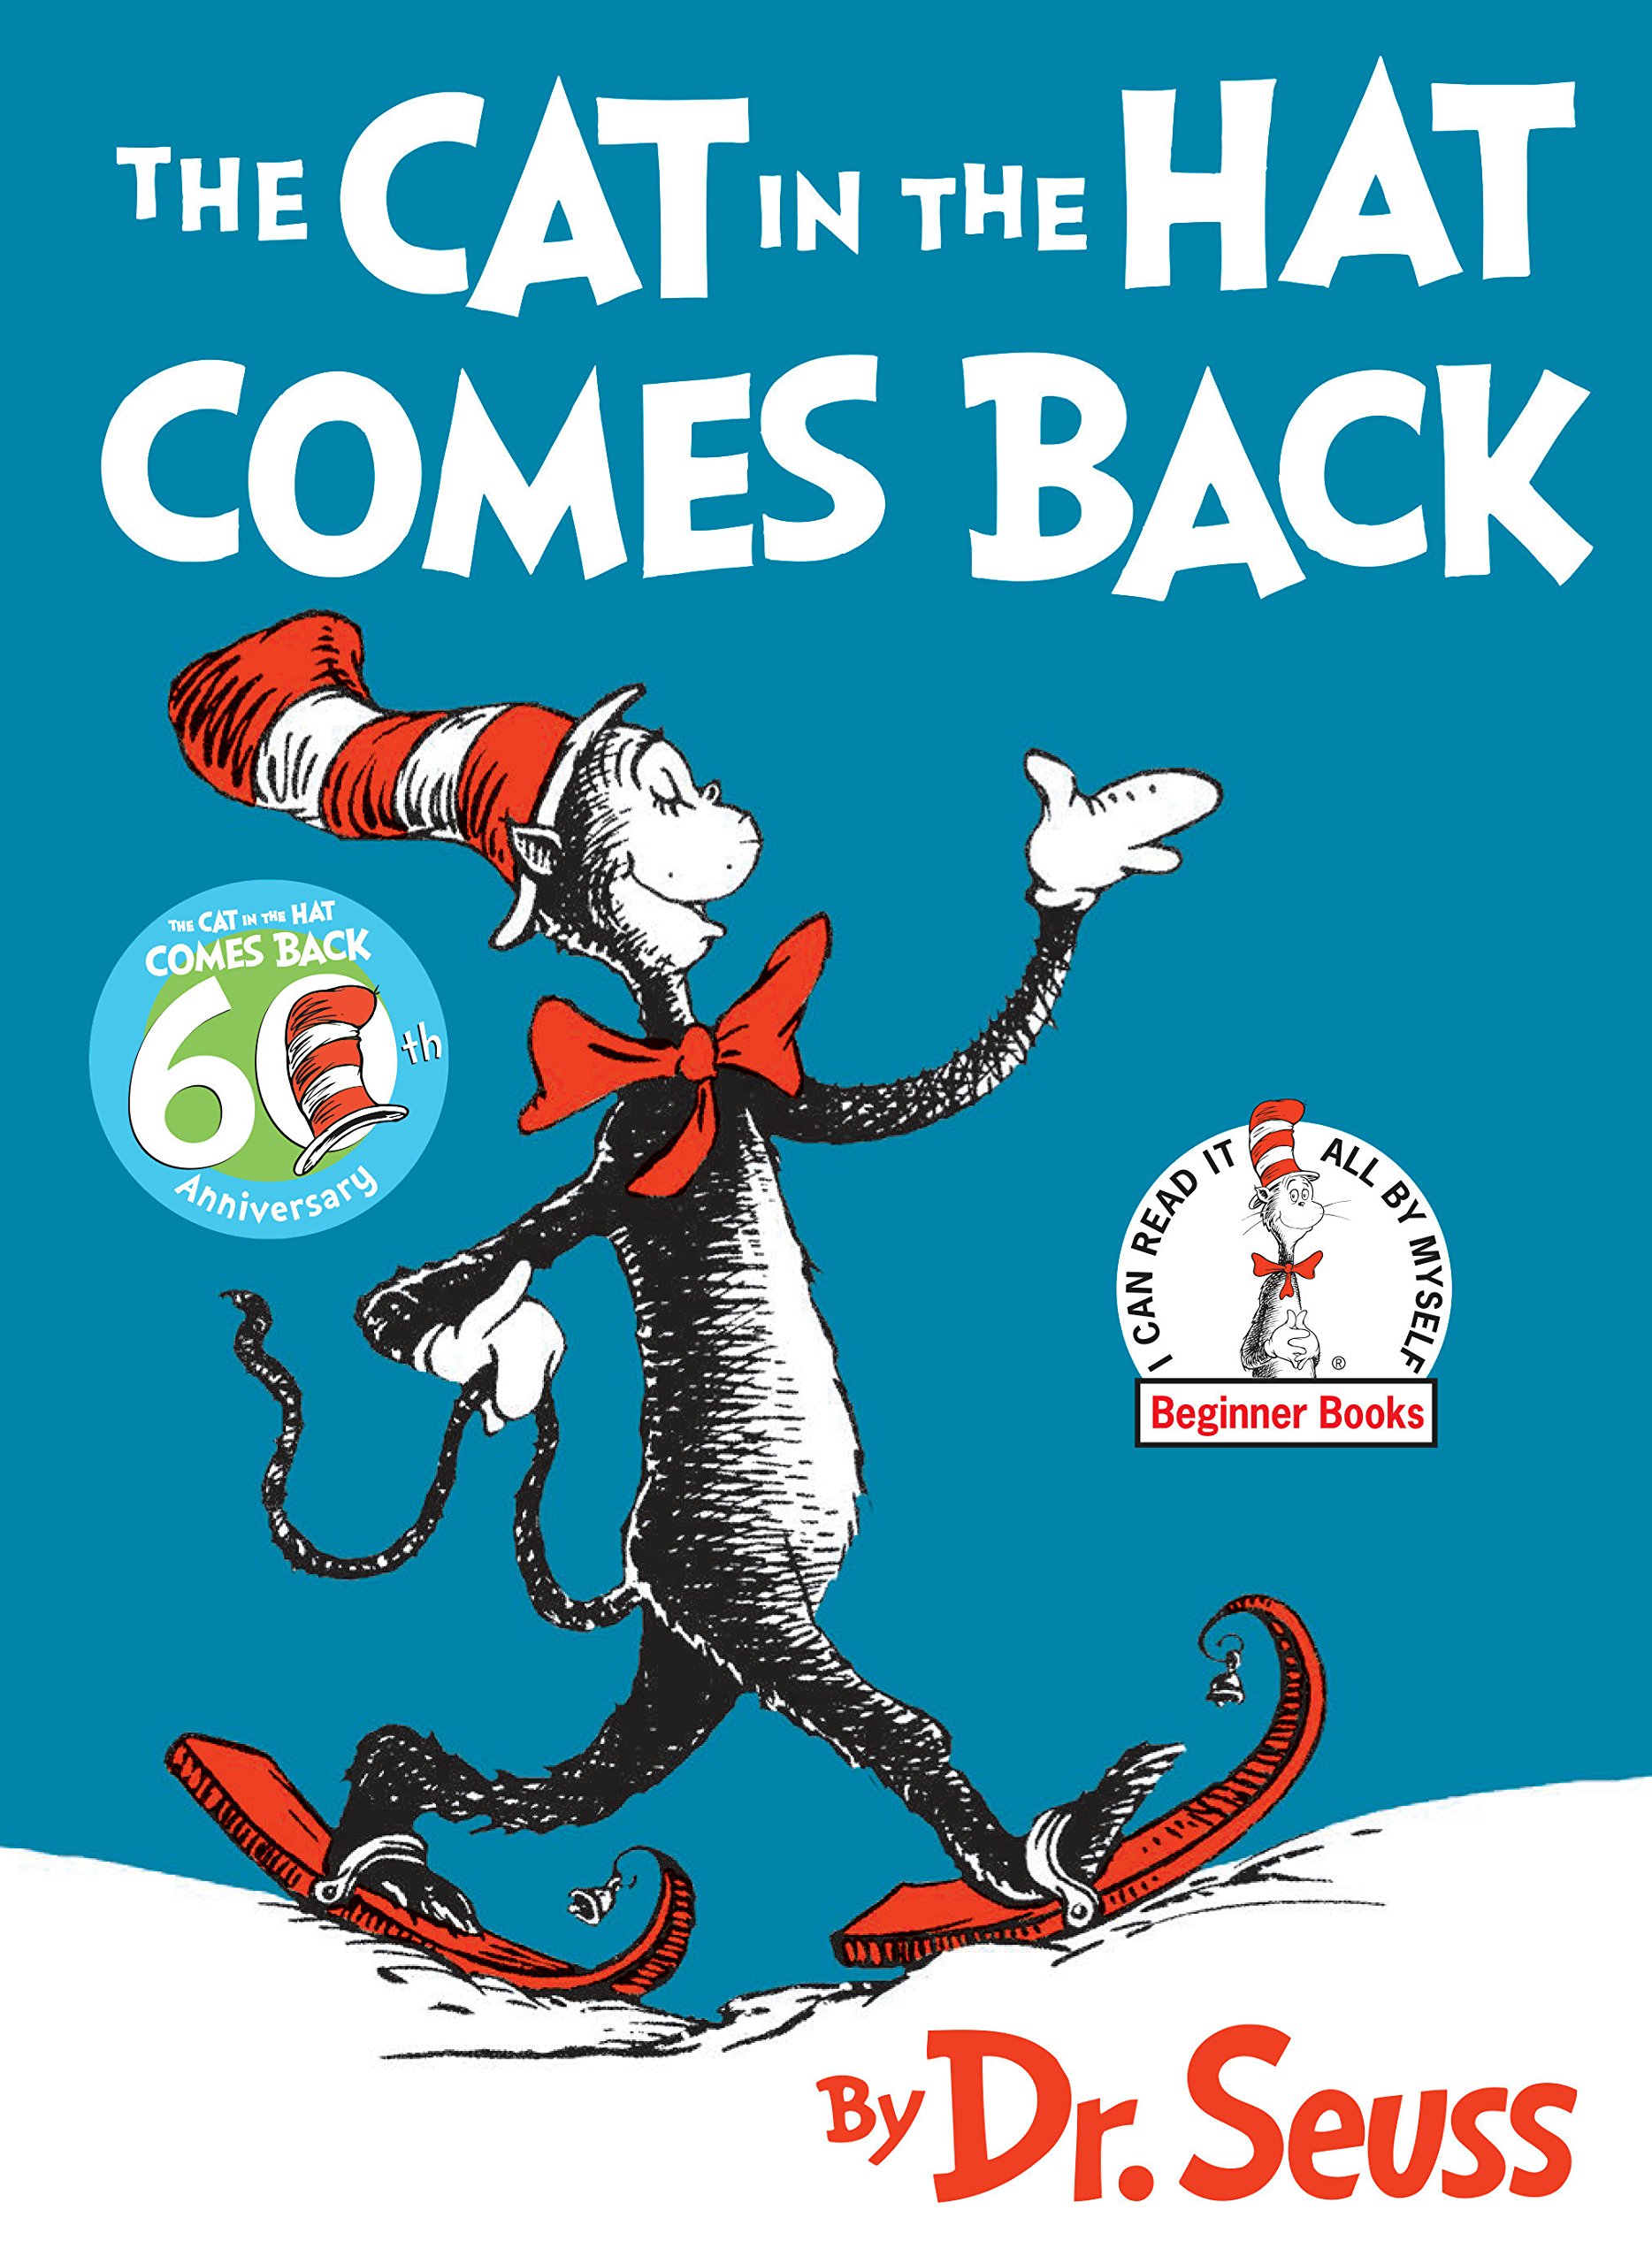 The Cat in the Hat Comes Back! Dr Seuss